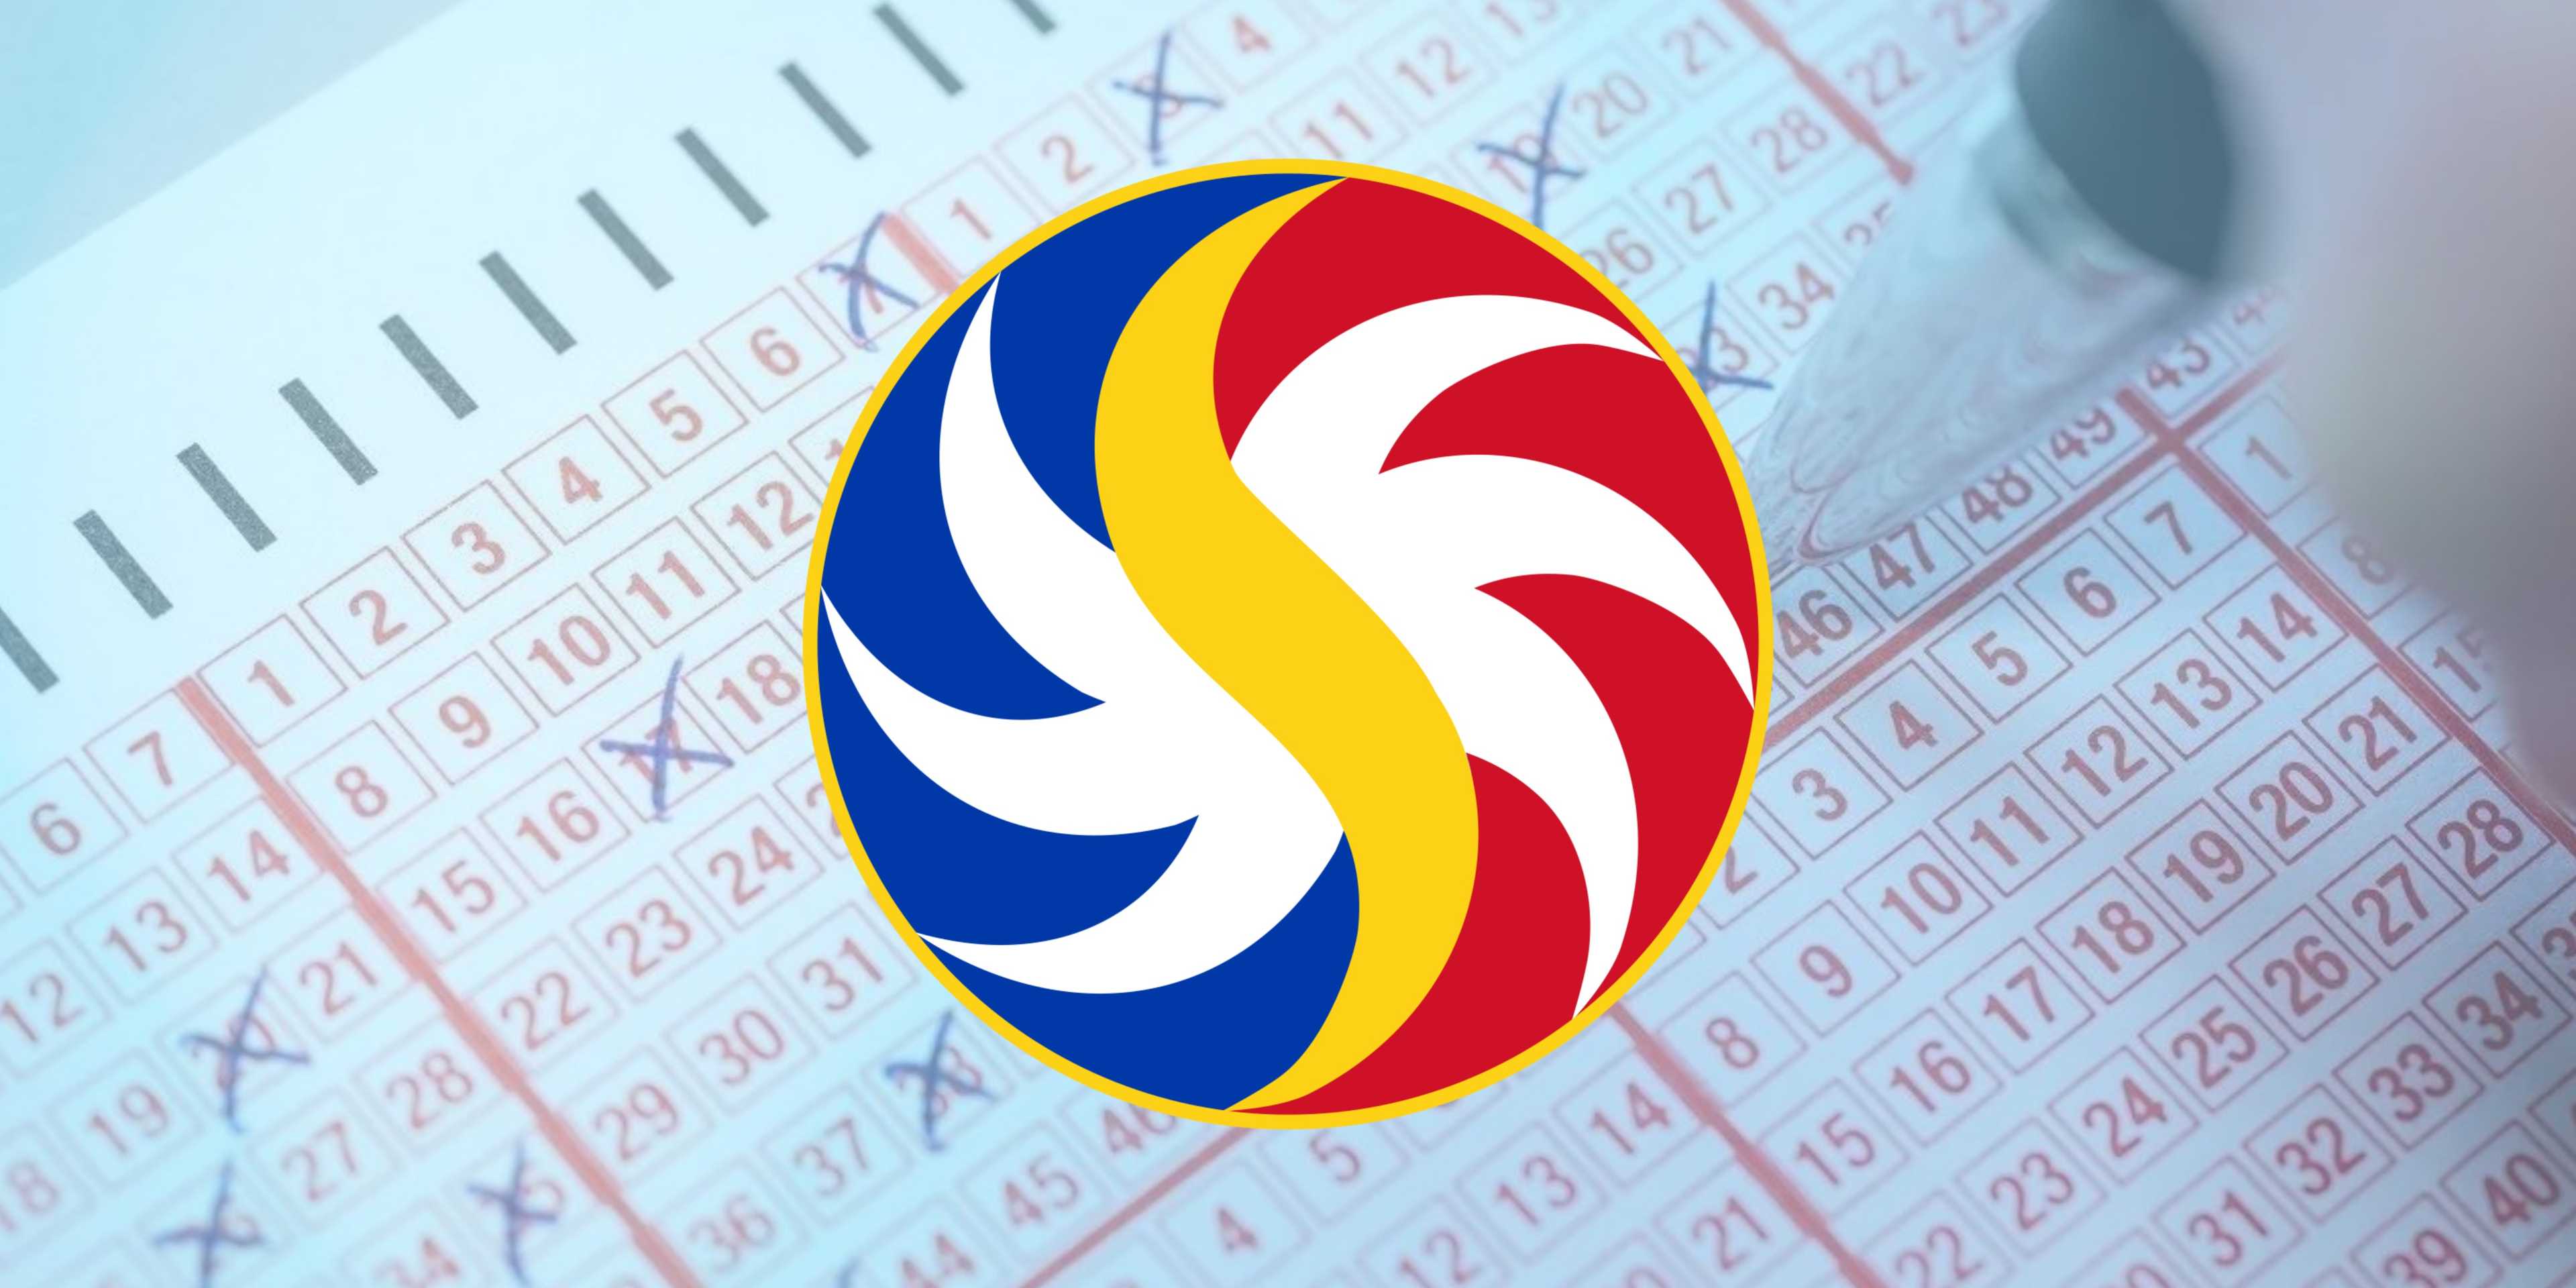 PCSO Lotto Draw Results on Sunday, March 3